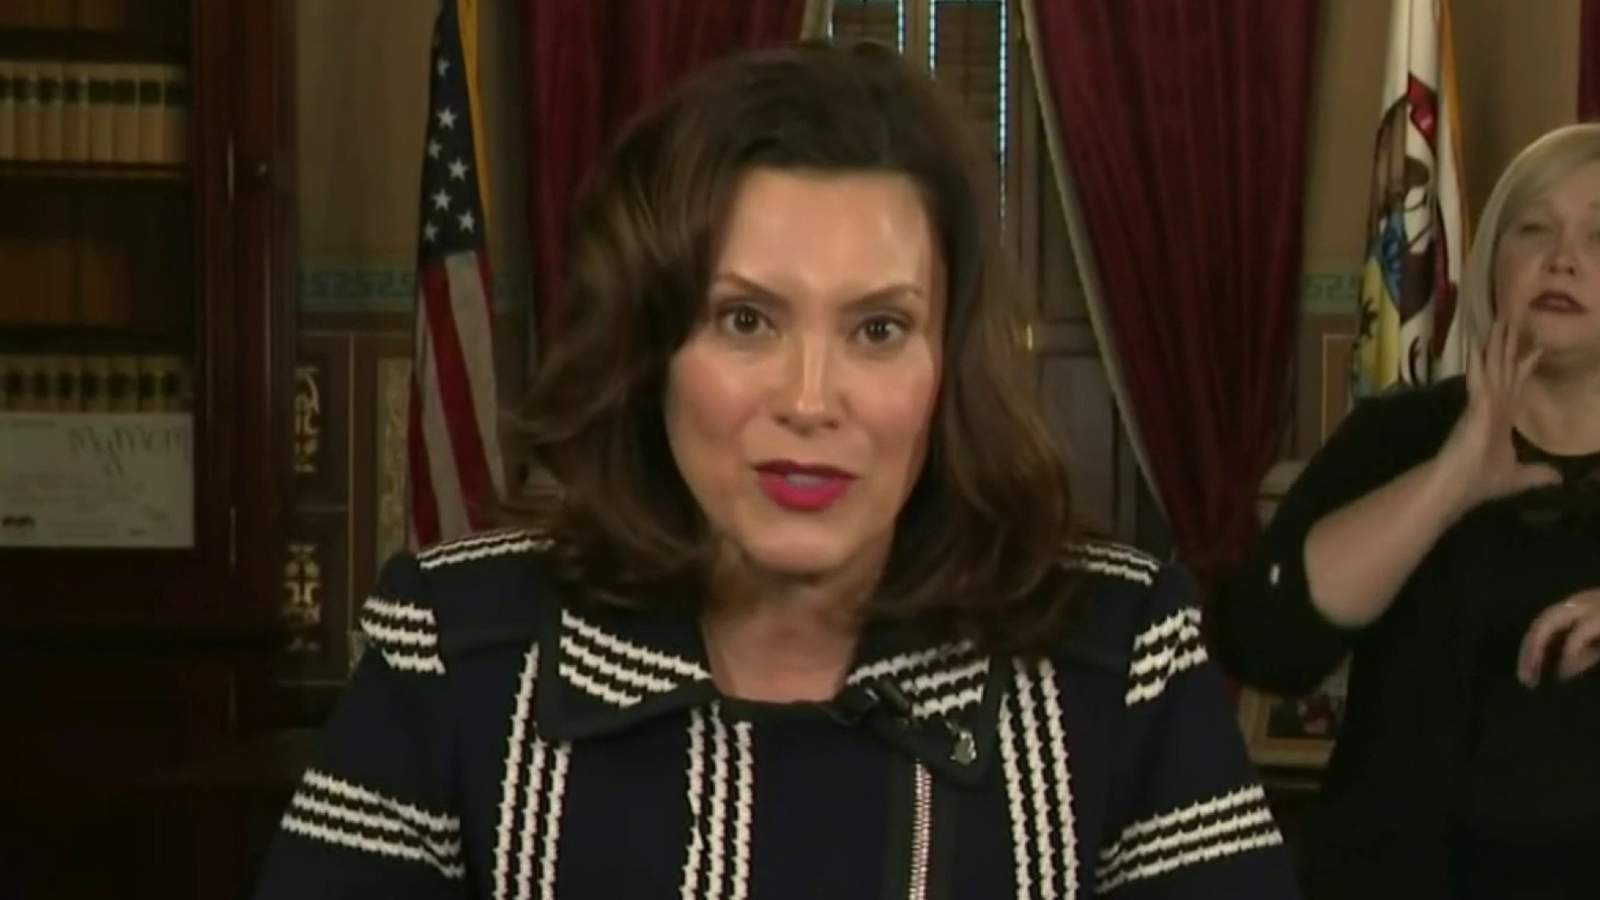 Michigan Gov. Whitmer calls on federal government to support widespread COVID-19 testing